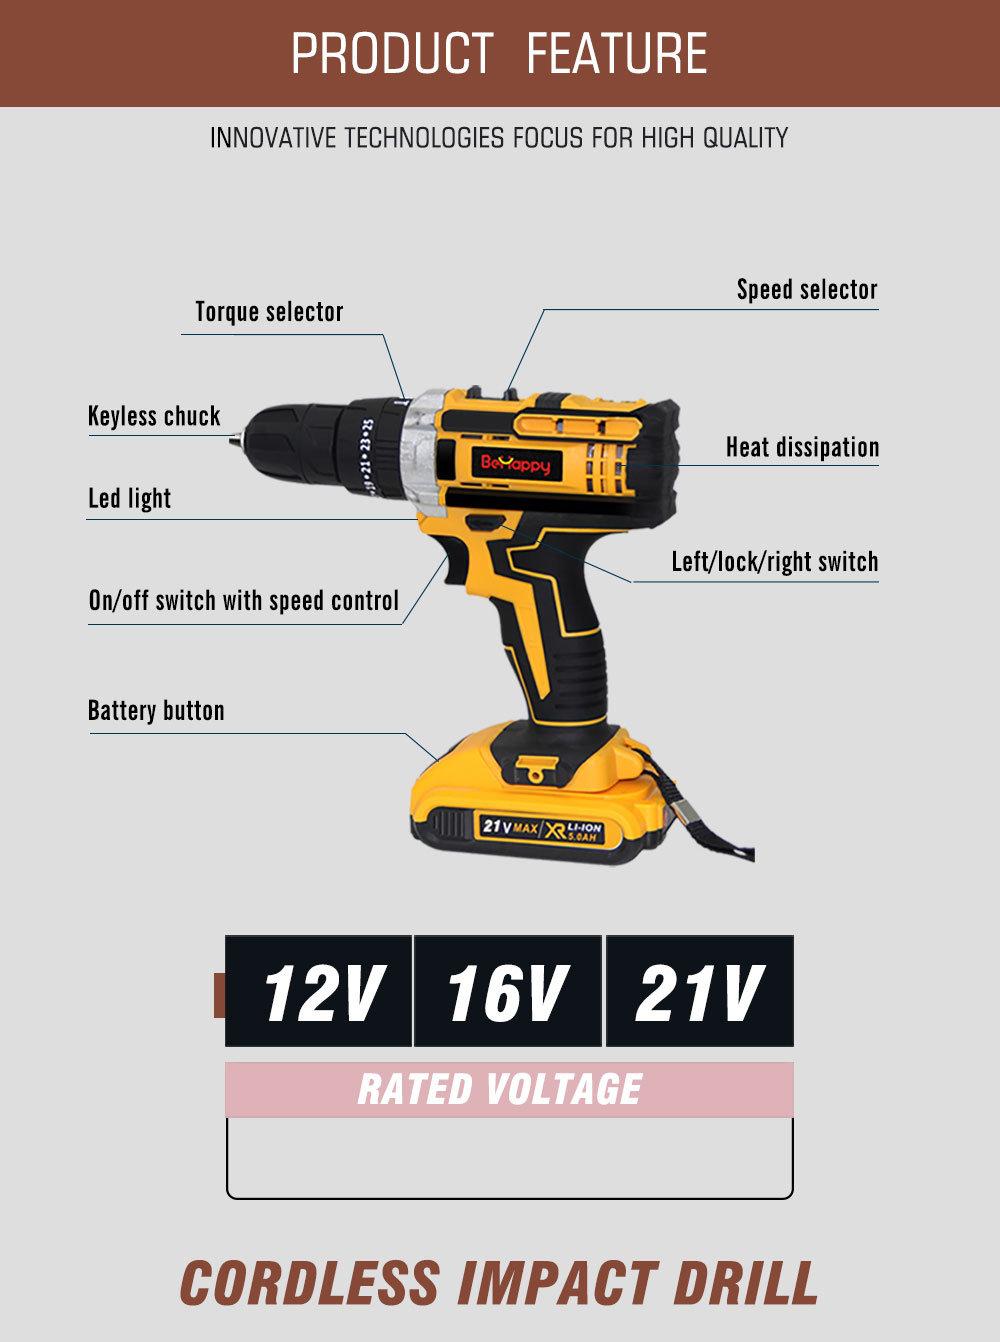 Behappy 16V Electric Crodless Impact Hand Drill Wrench 1/2" Dr Power Tool with Sockets